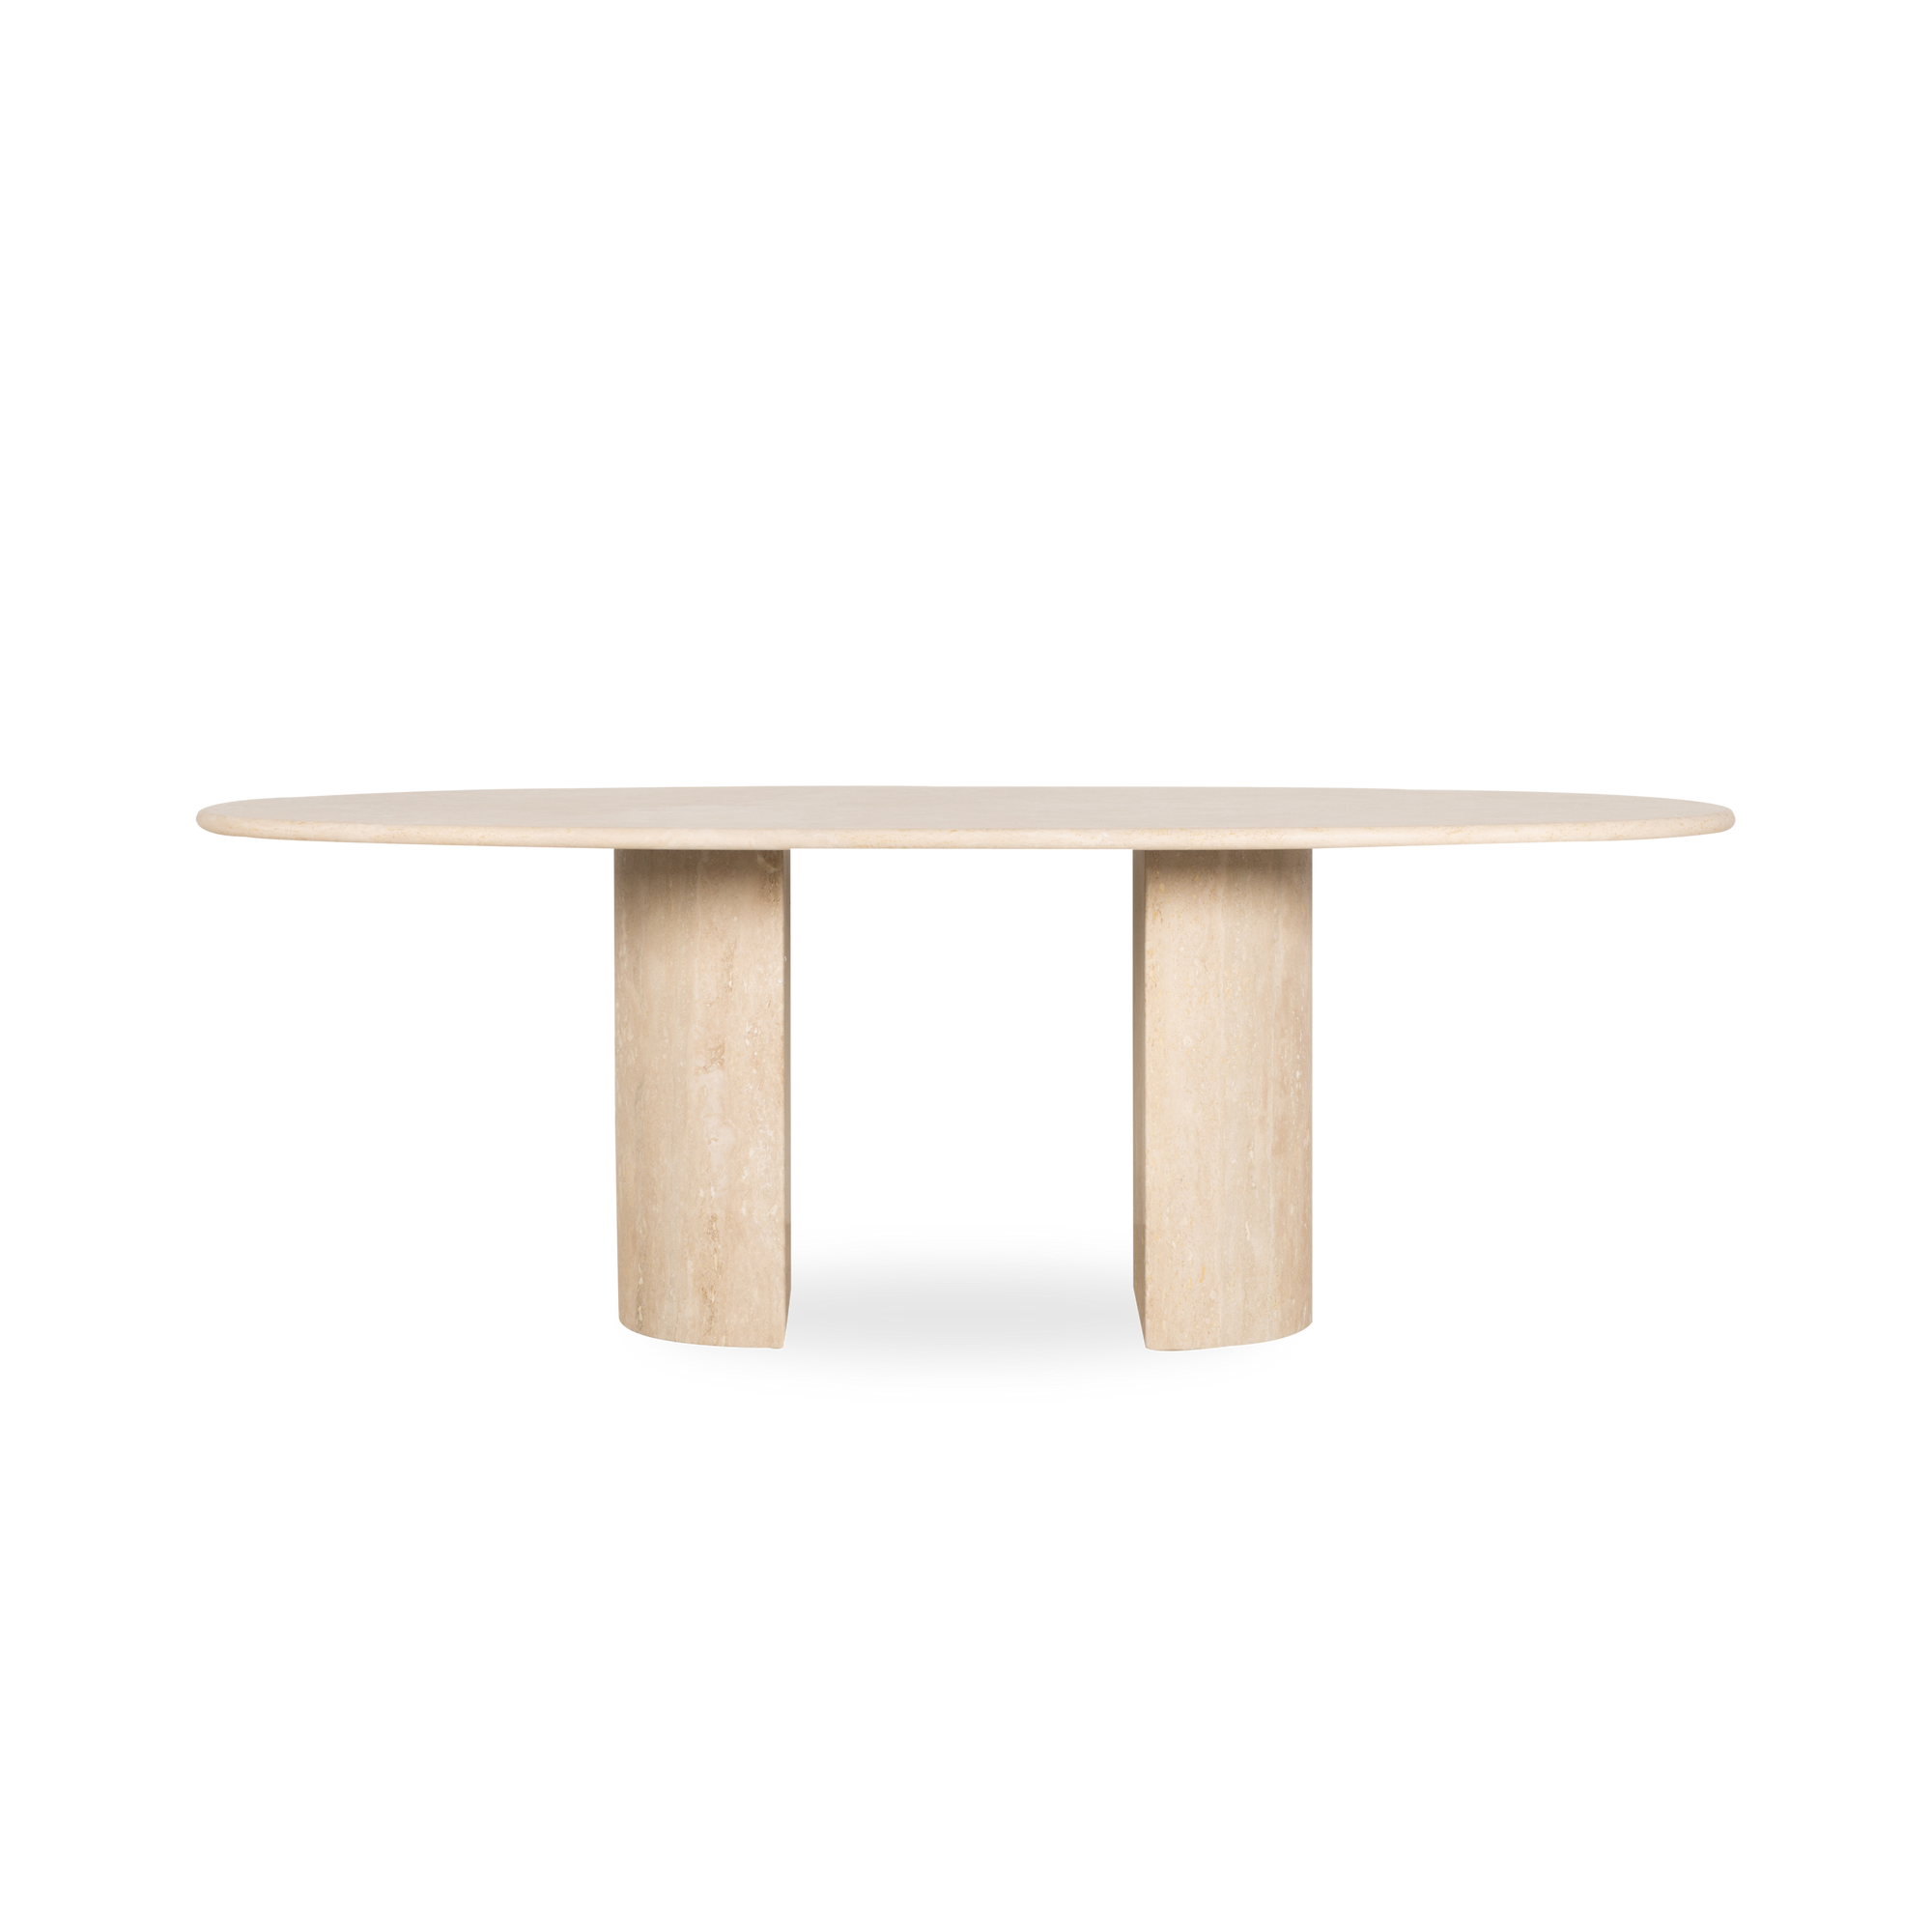 Designed by Giulio Cappellini, the Dolmen table pays homage to the tradition of classic marble with a contemporary twist influenced by the stylistic nuances of the 1980s.